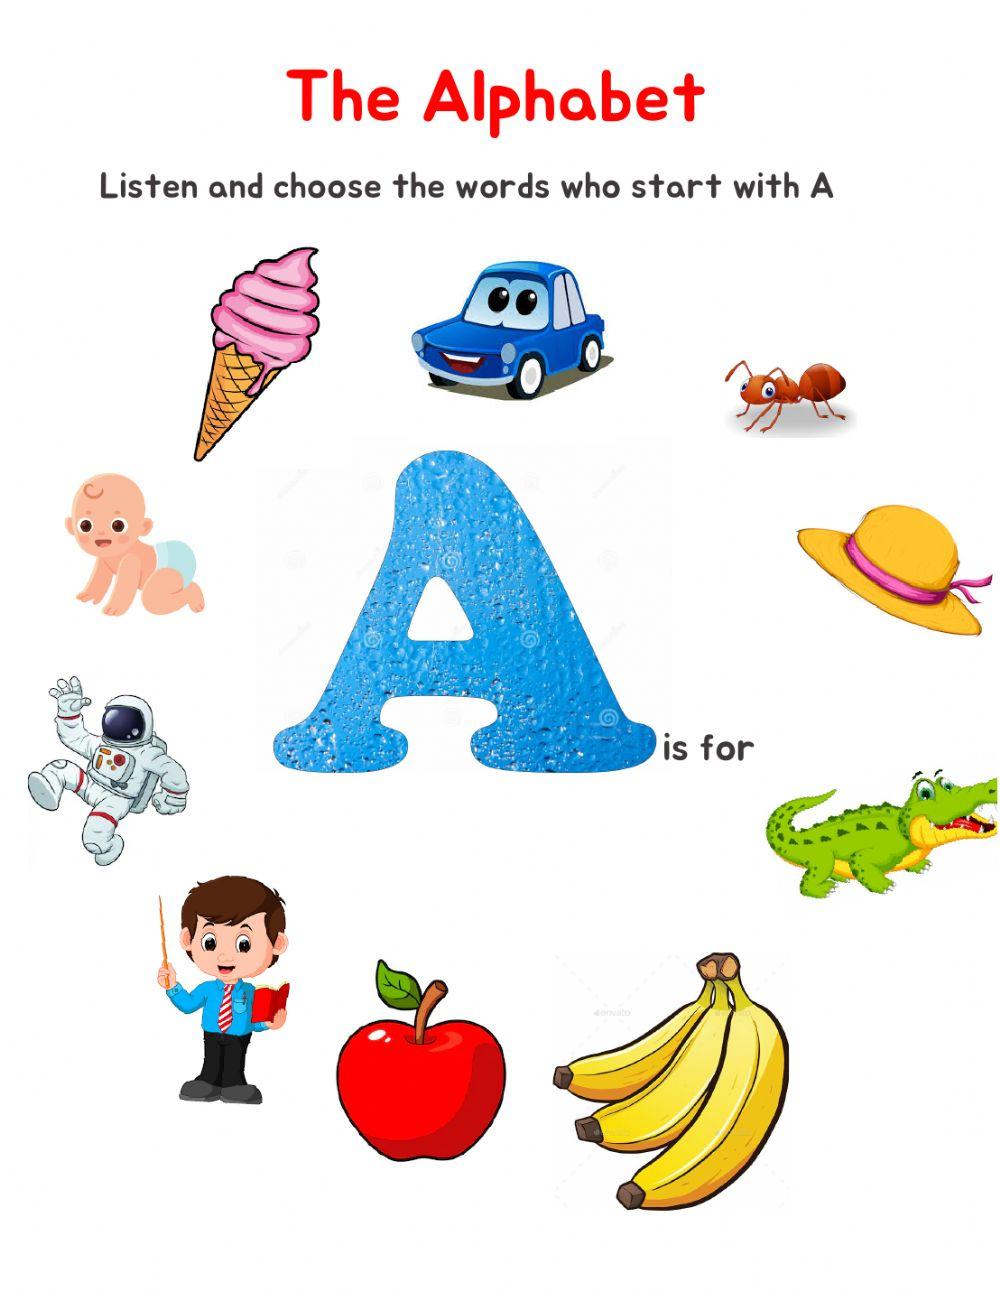 A is for